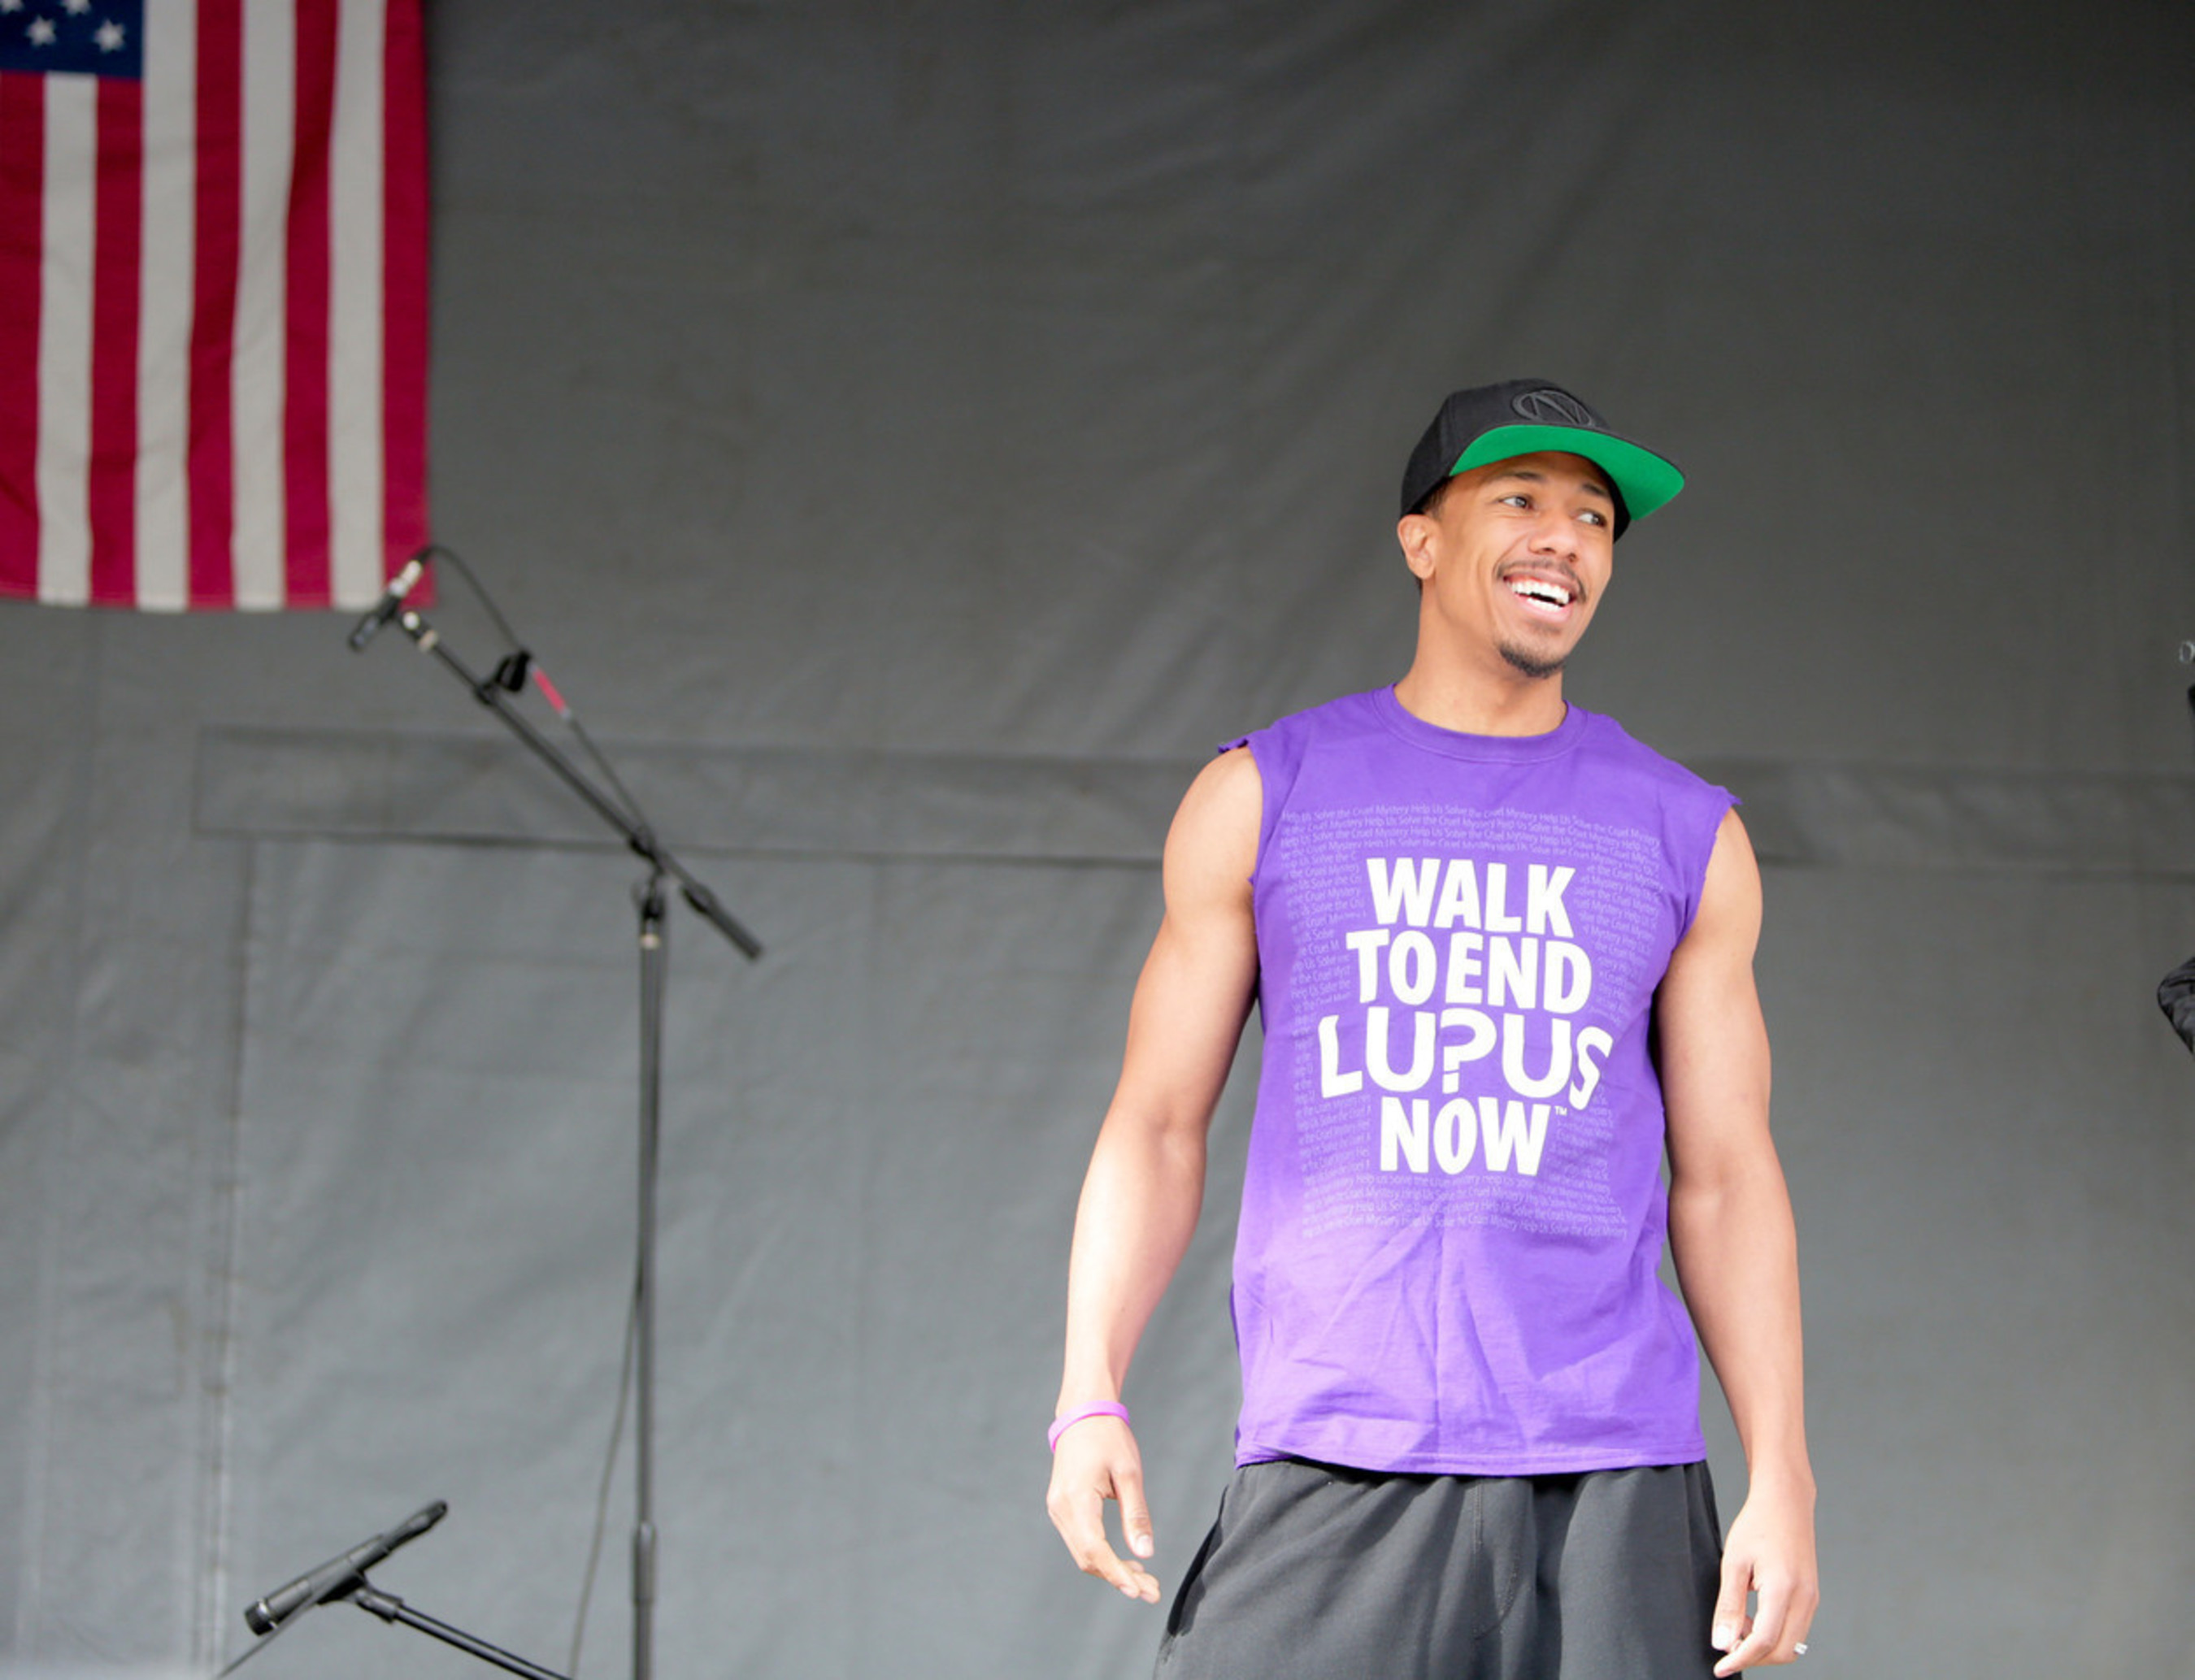 Multi-talented Entertainer Nick Cannon Leads Thousands of DC Residents in Walk to End Lupus Now  (PRNewsFoto/Lupus Foundation of America)